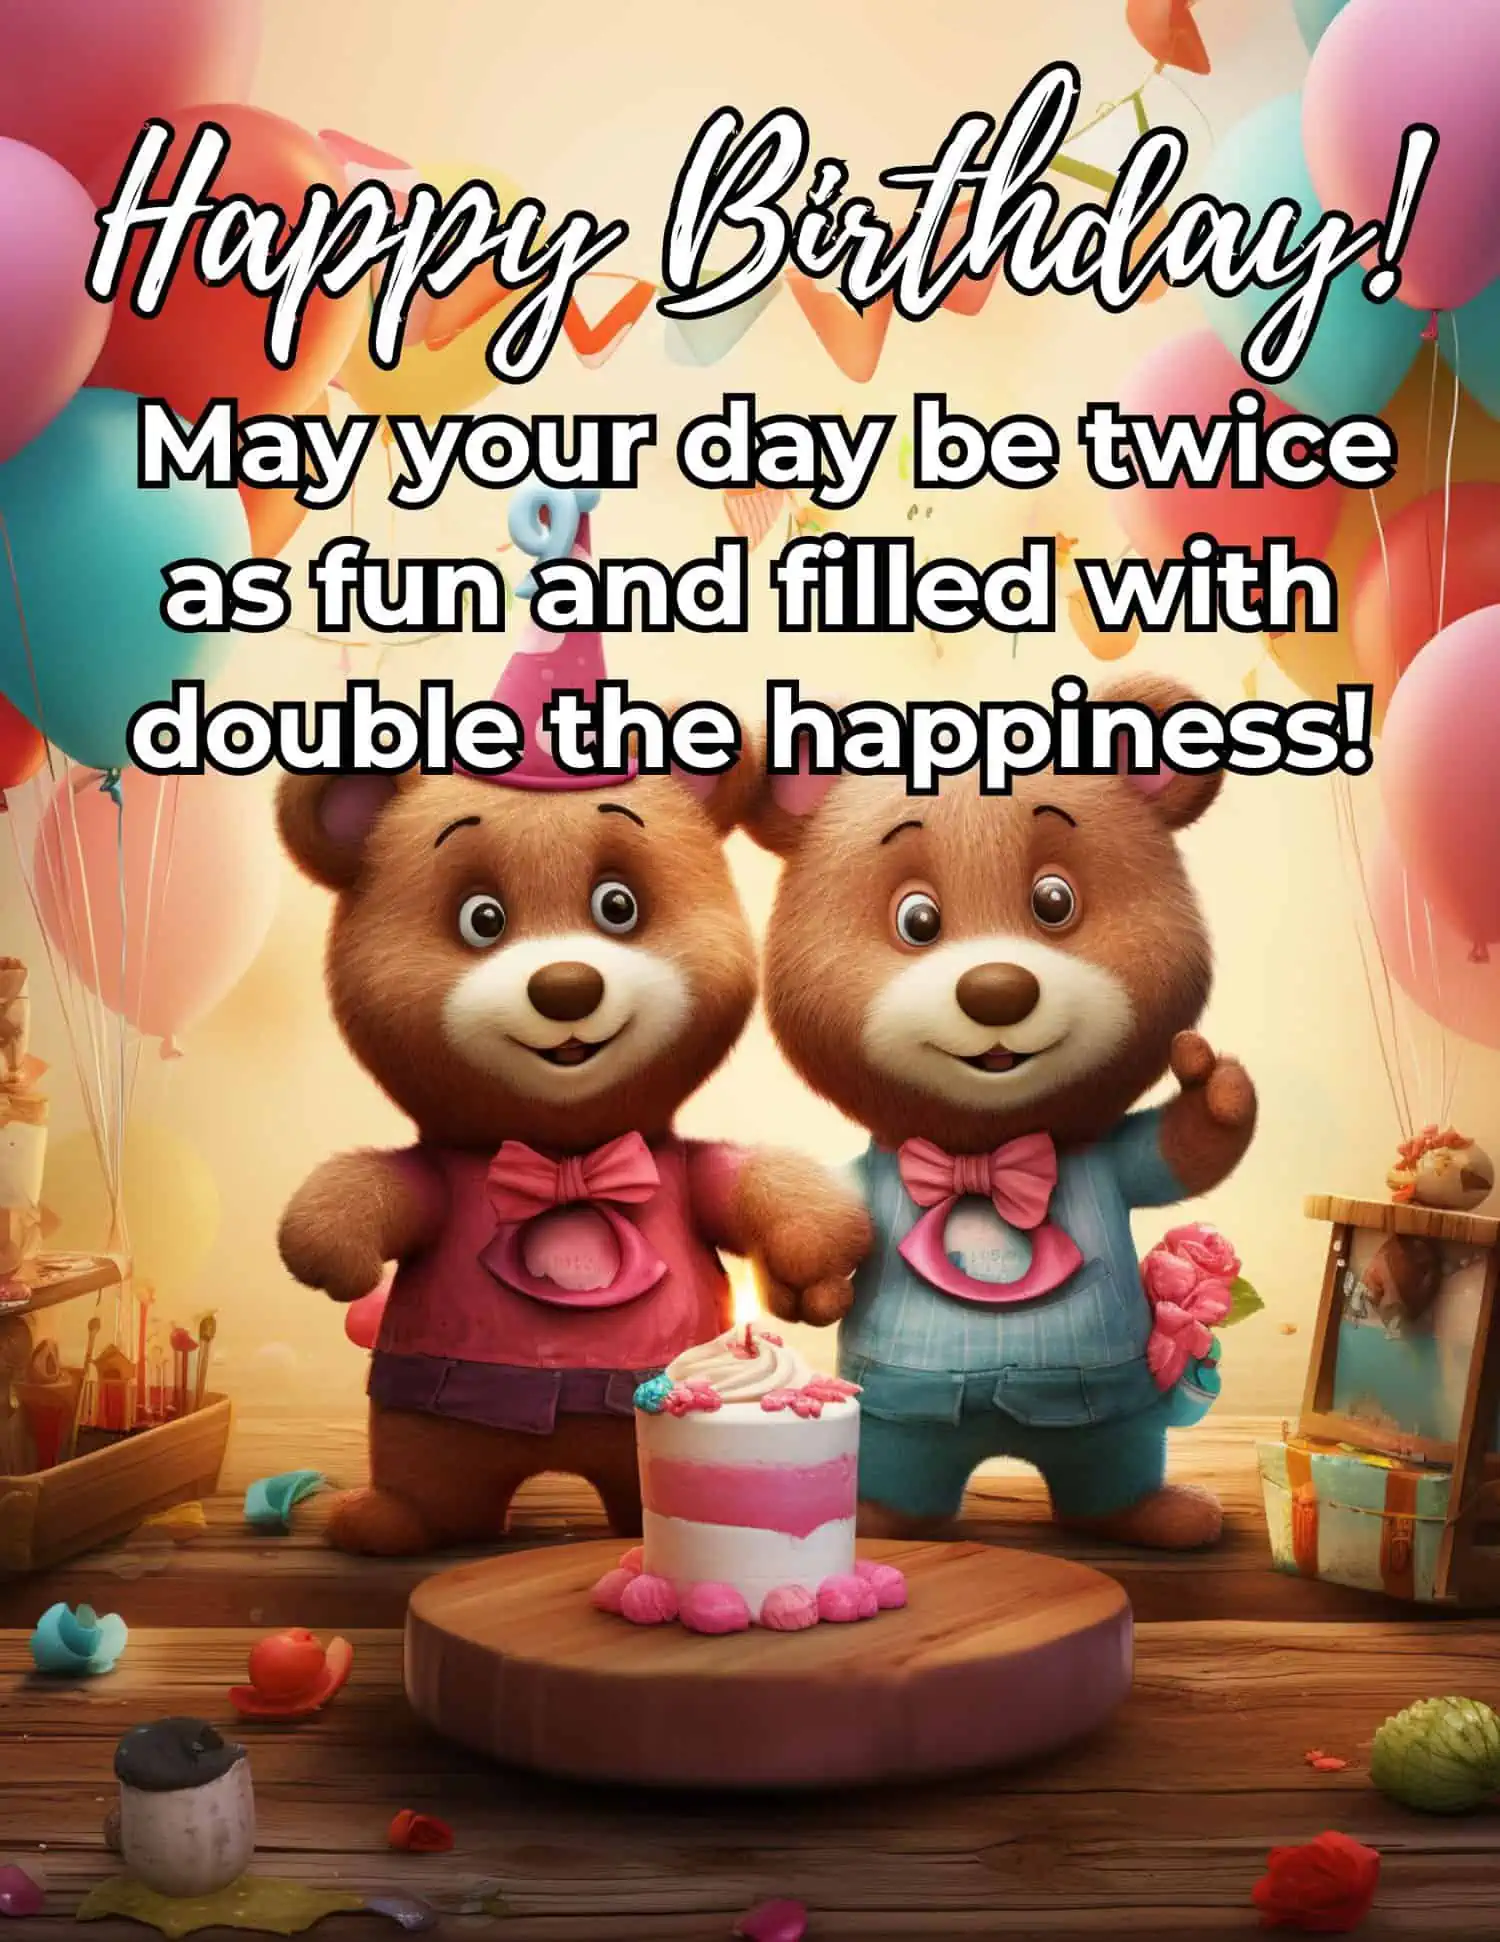 A collection of delightful and heartwarming birthday wishes specifically designed for twins on their third birthday, highlighting the unique bond they share and the individual joy each twin brings.